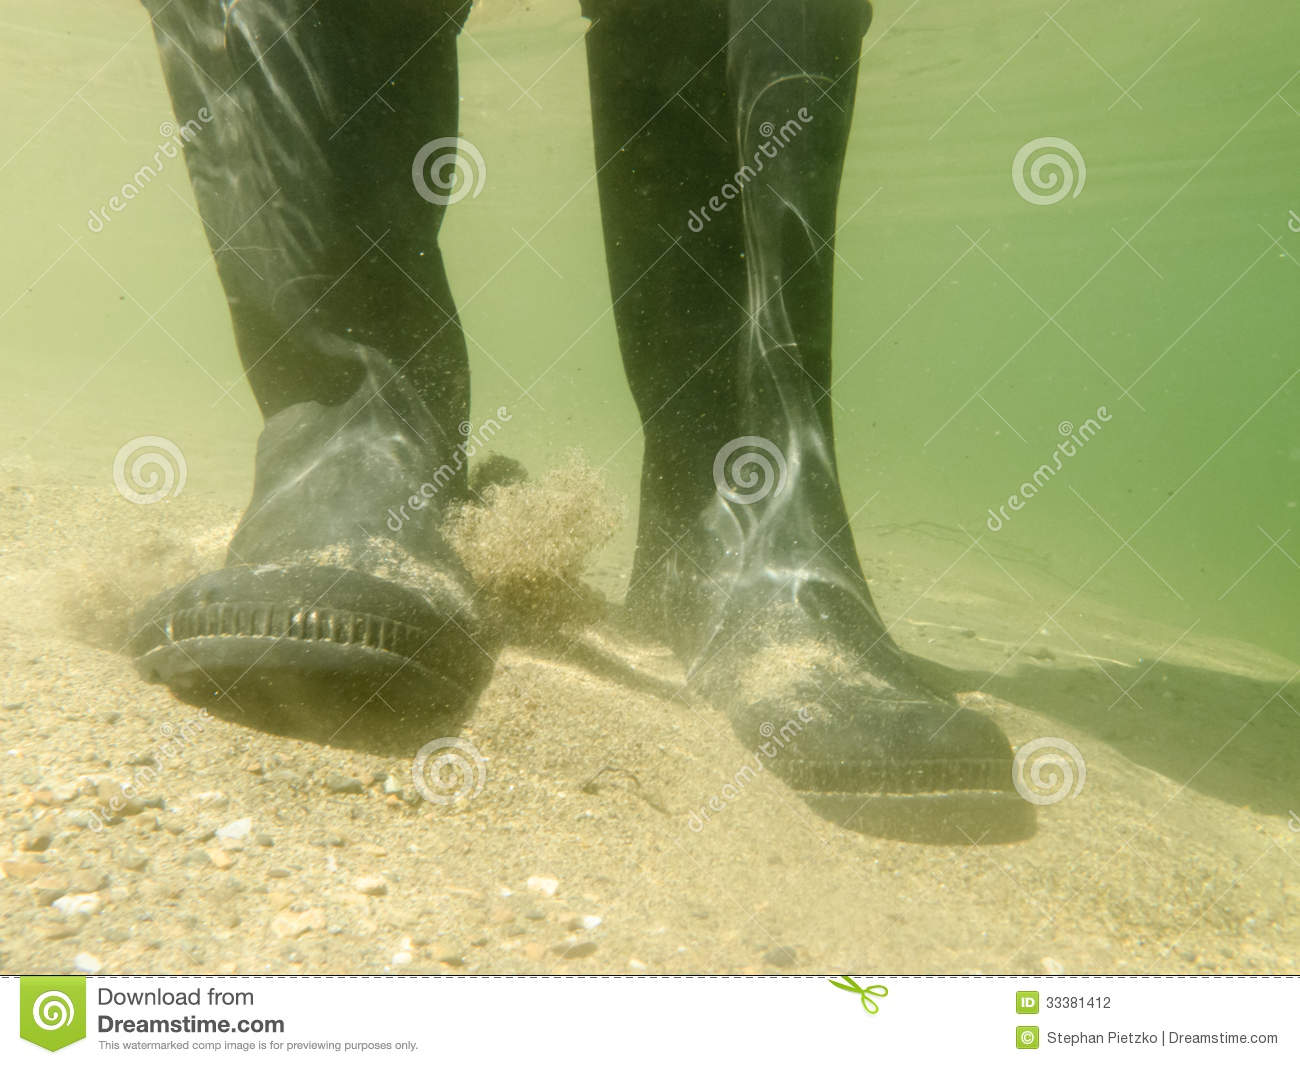 Closeup Underwater View Of Rubber Boots Gumboots Or Waders Of A Person    